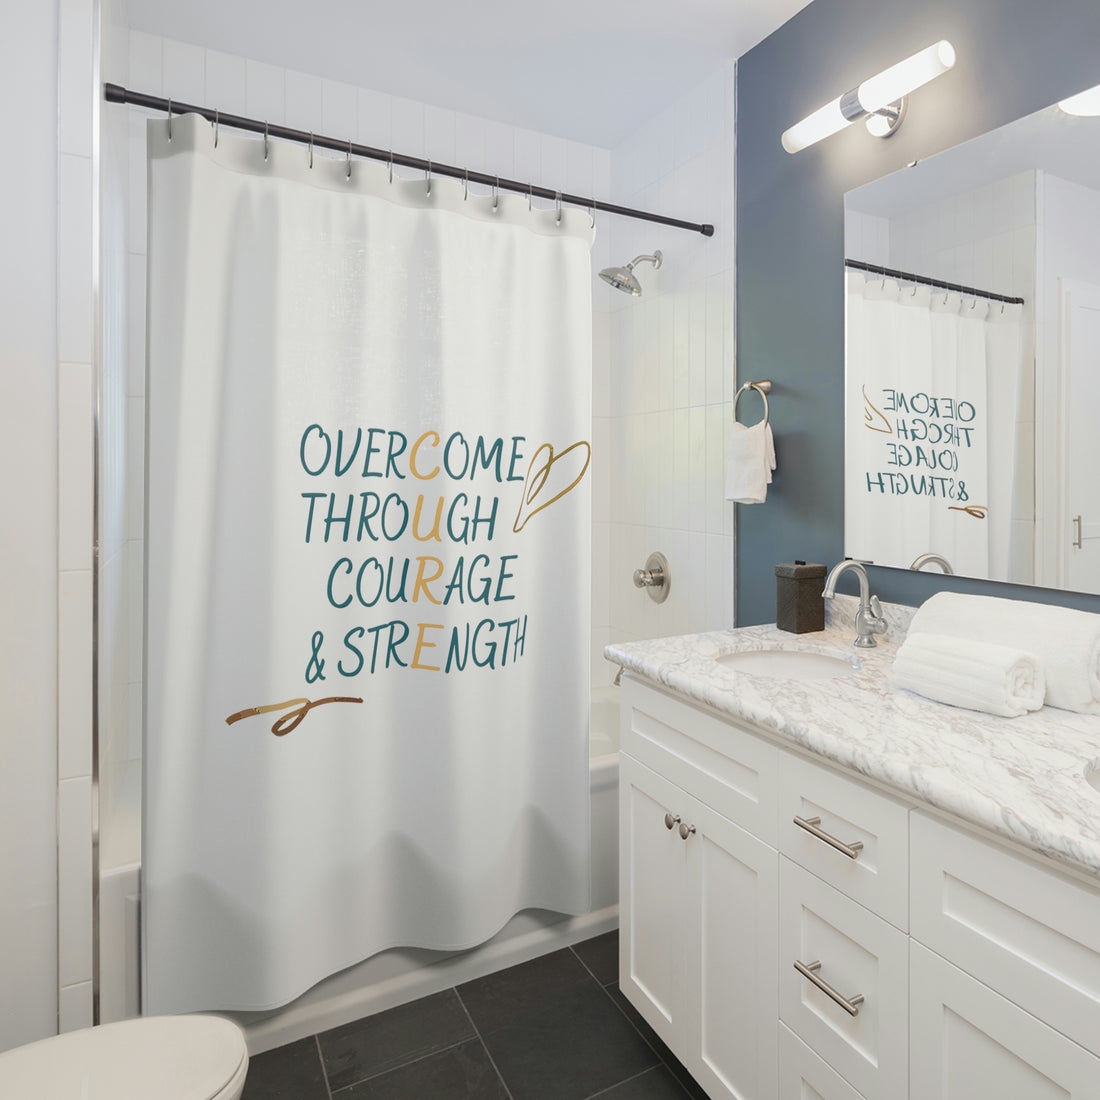 Overcome Through Courage and Strength - White Shower Curtain